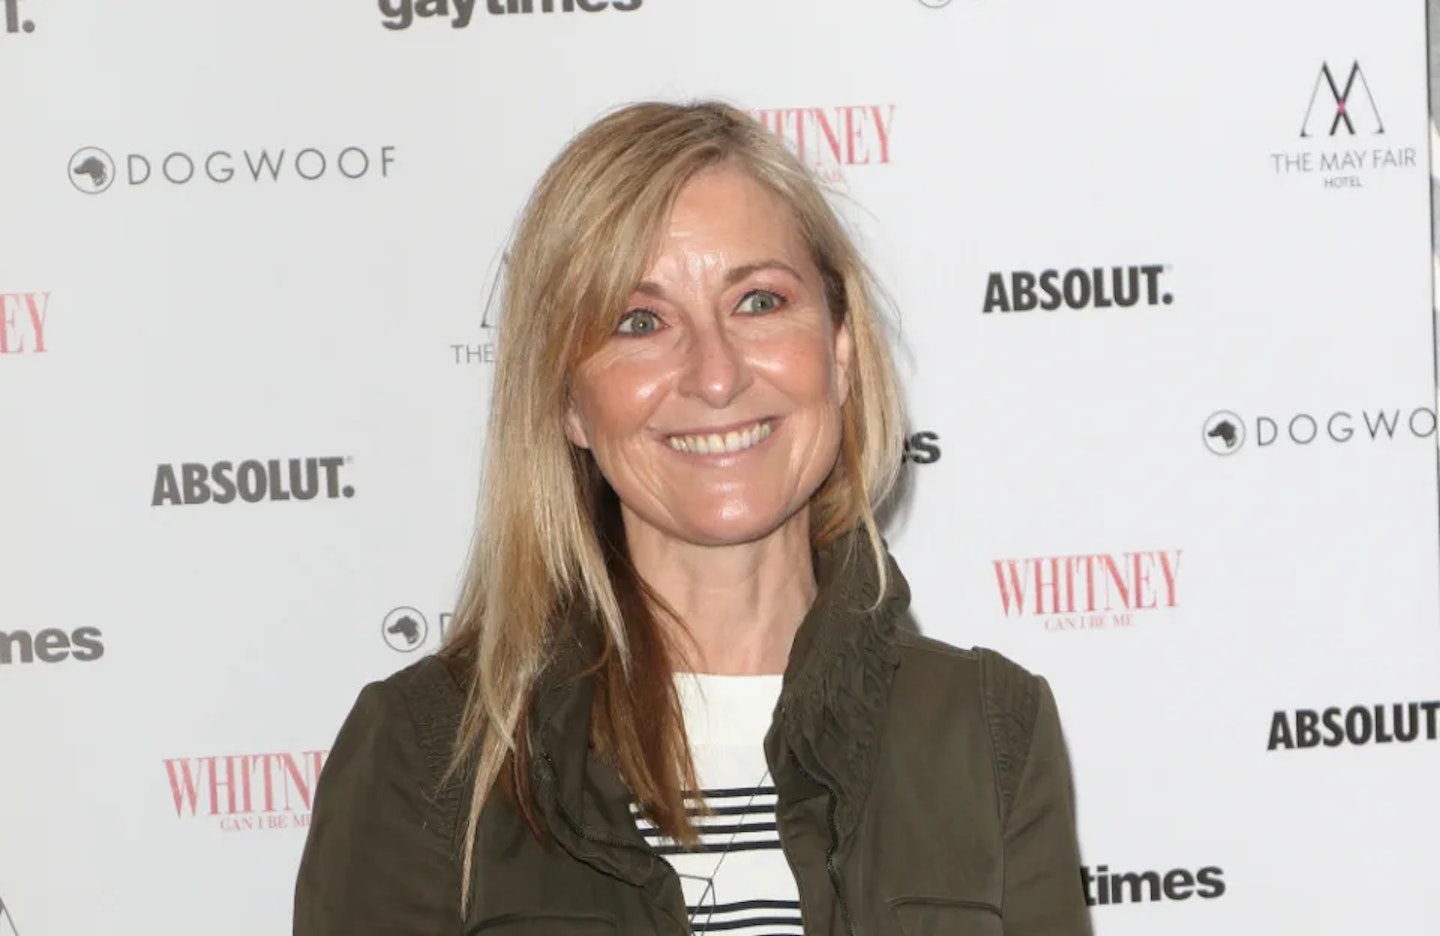 Fiona Phillips has been diagnosed with Alzheimers